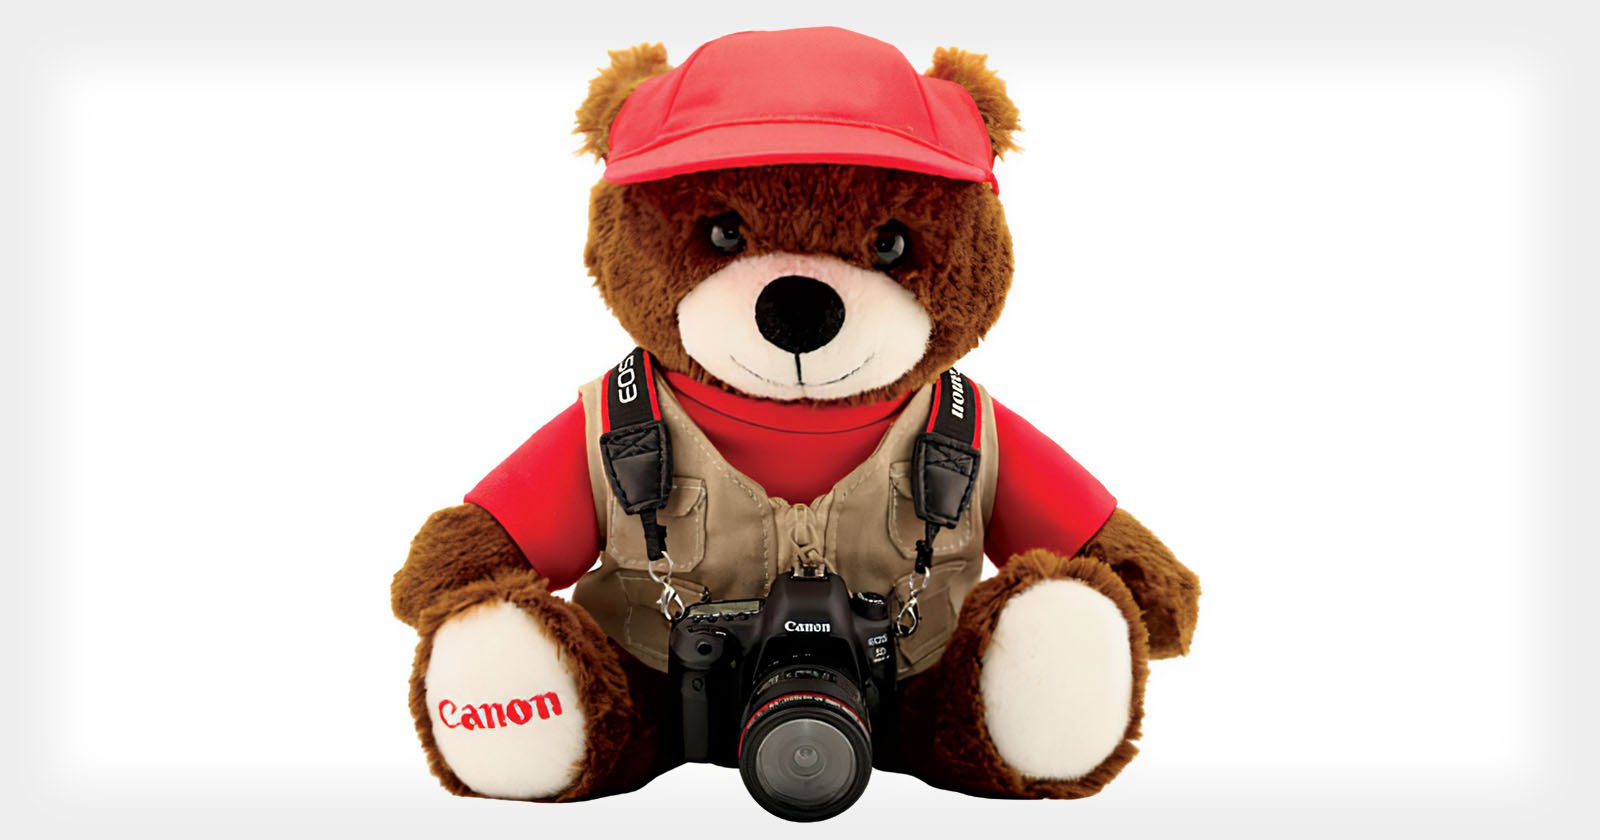 This Official Canon Teddy Bear Comes with Its Personal DSLR